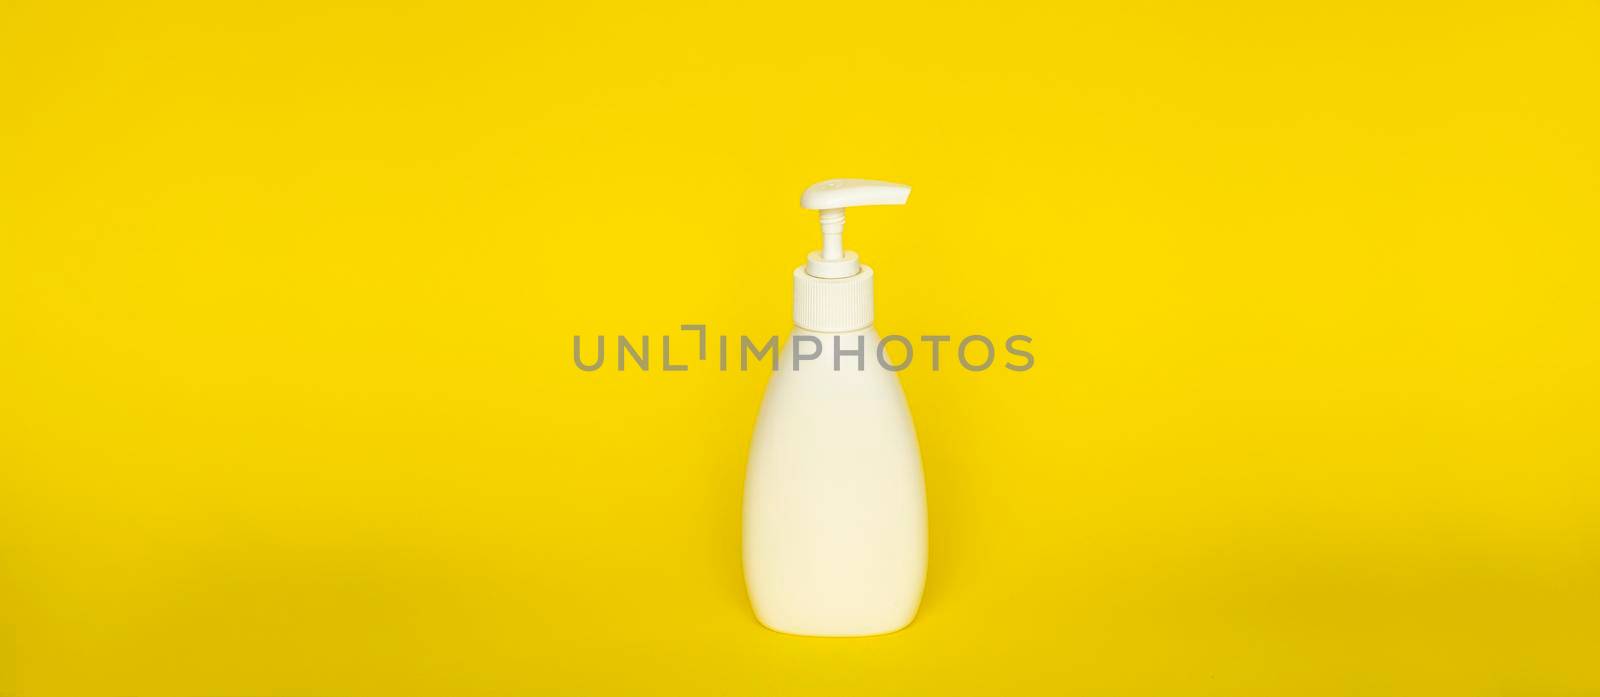 Large white plastic bottle with pump dispenser on yellow background. Mock up template for design